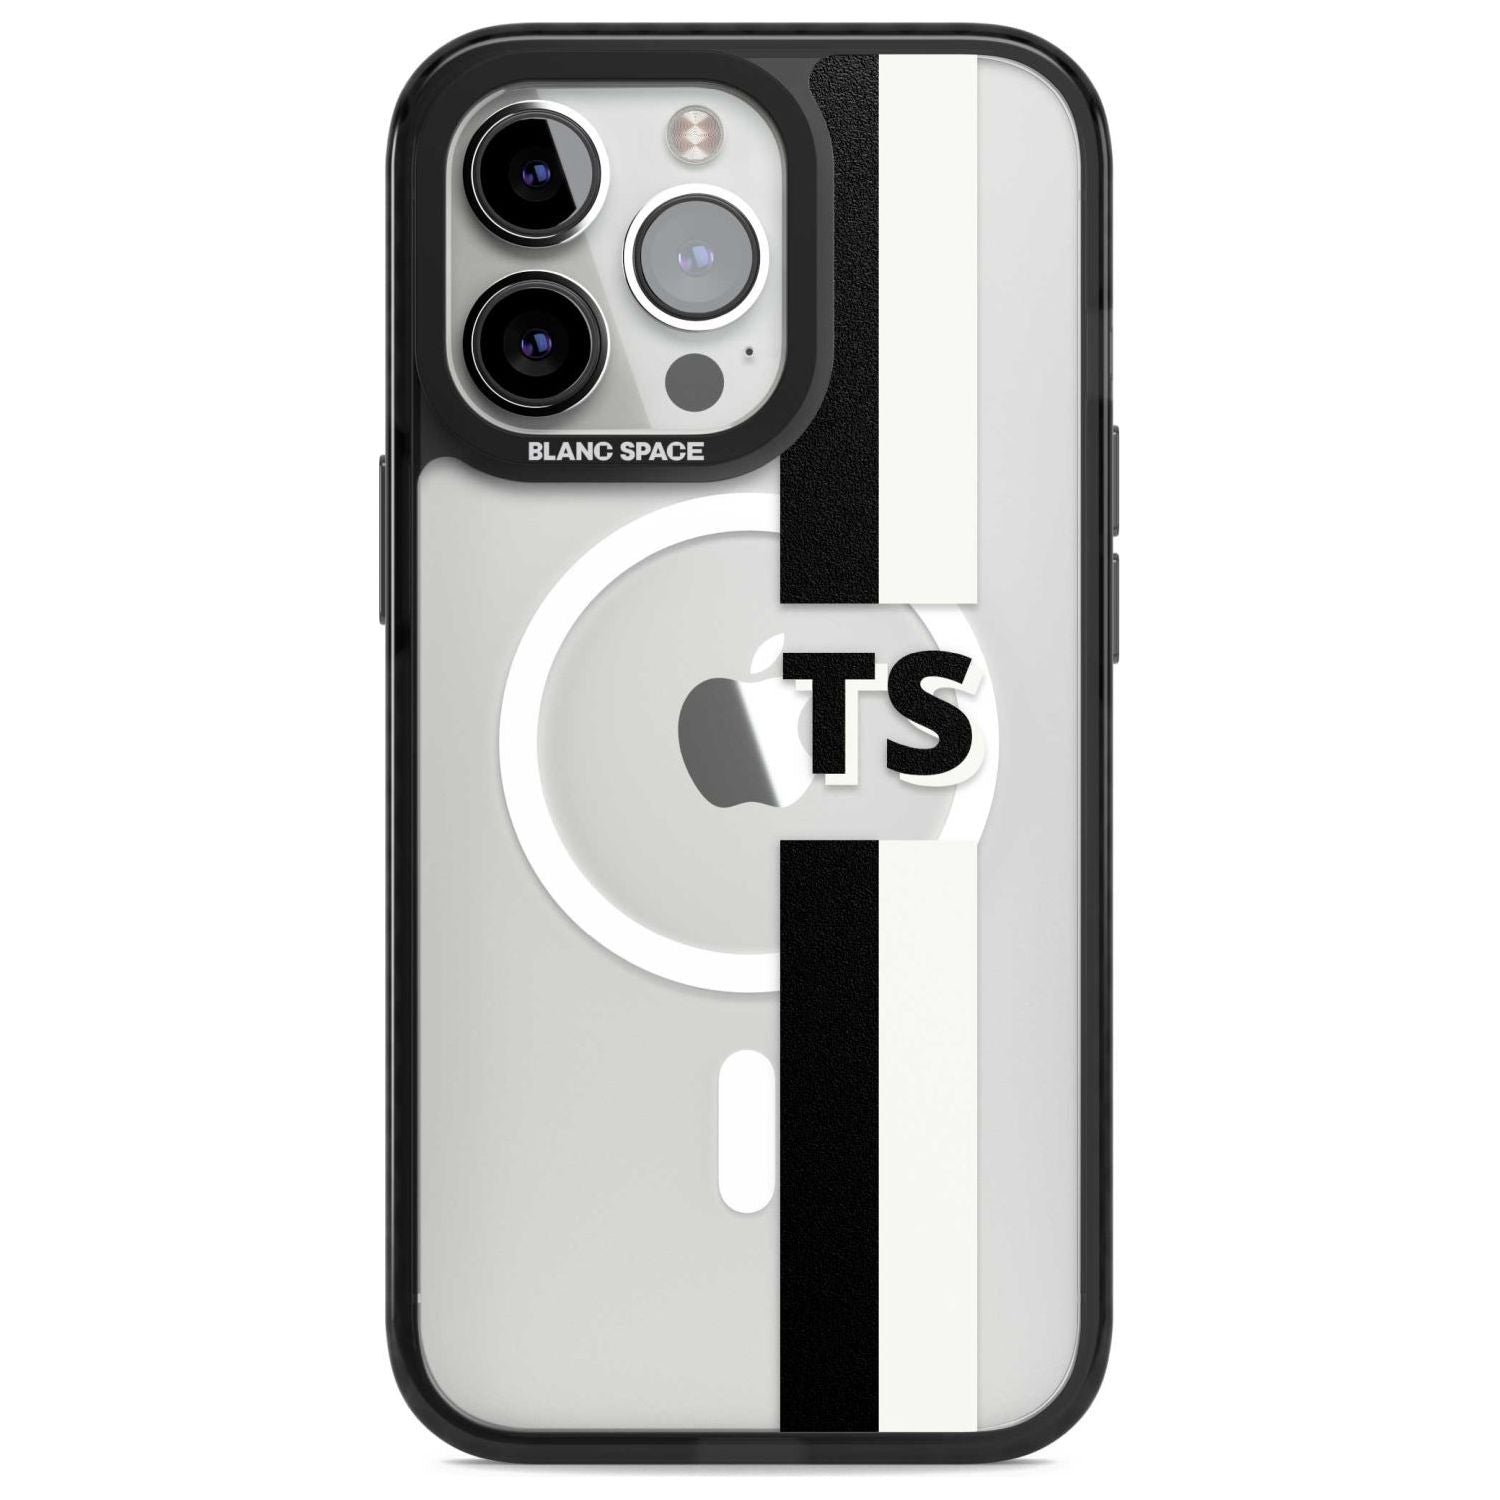 Personalised Clear Text  6A Custom Phone Case iPhone 15 Pro Max / Magsafe Black Impact Case,iPhone 15 Pro / Magsafe Black Impact Case,iPhone 14 Pro Max / Magsafe Black Impact Case,iPhone 14 Pro / Magsafe Black Impact Case,iPhone 13 Pro / Magsafe Black Impact Case Blanc Space